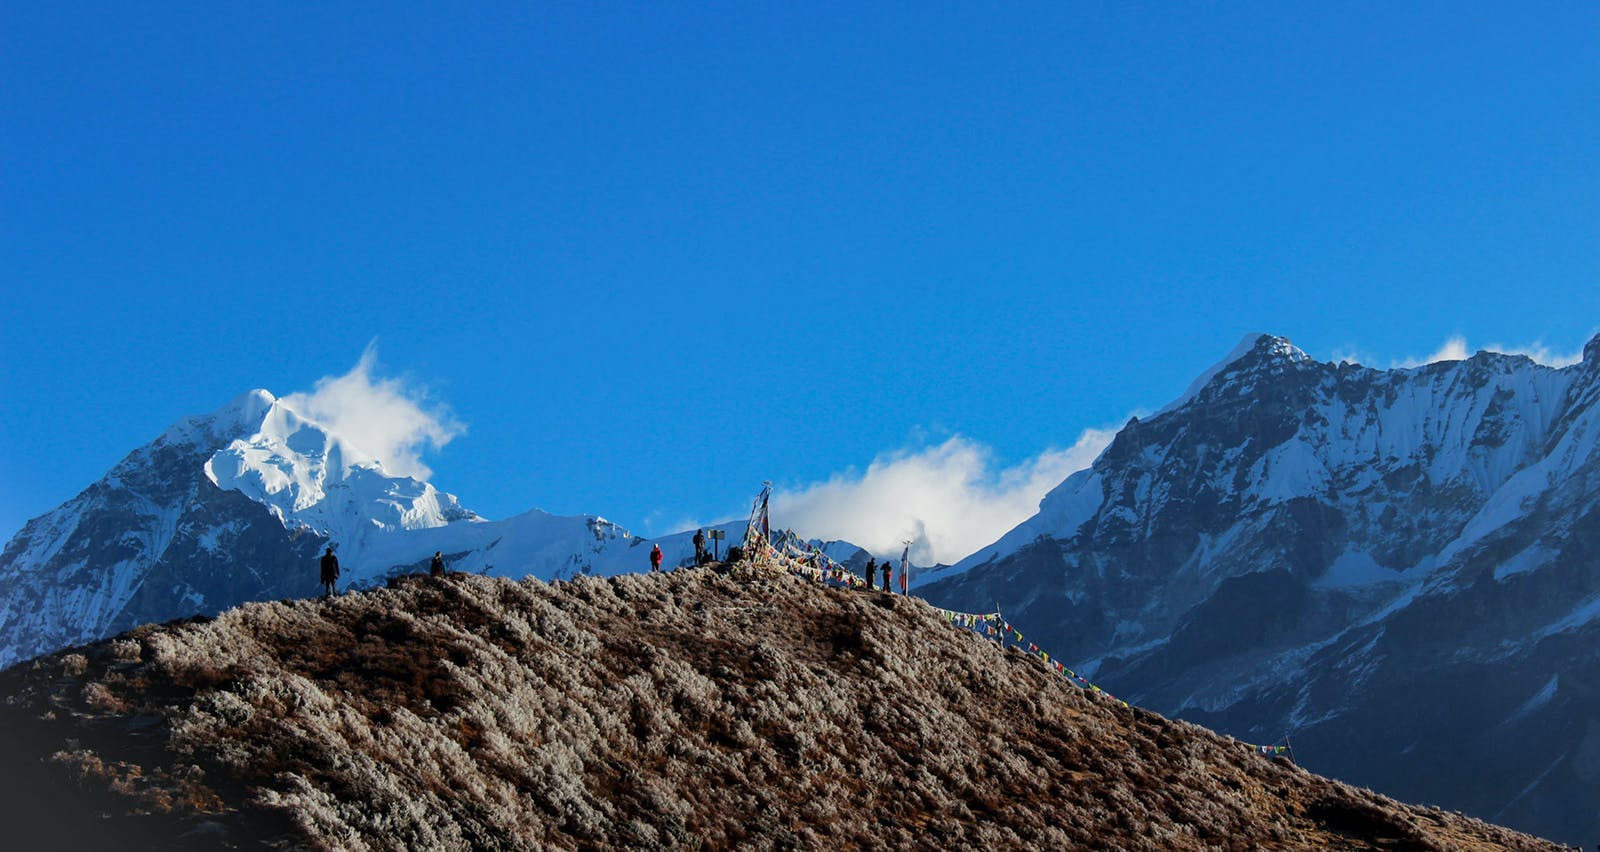 Trekkers standing on viewpoint 2 amidst the backdrop of Mt Kanchenjunga